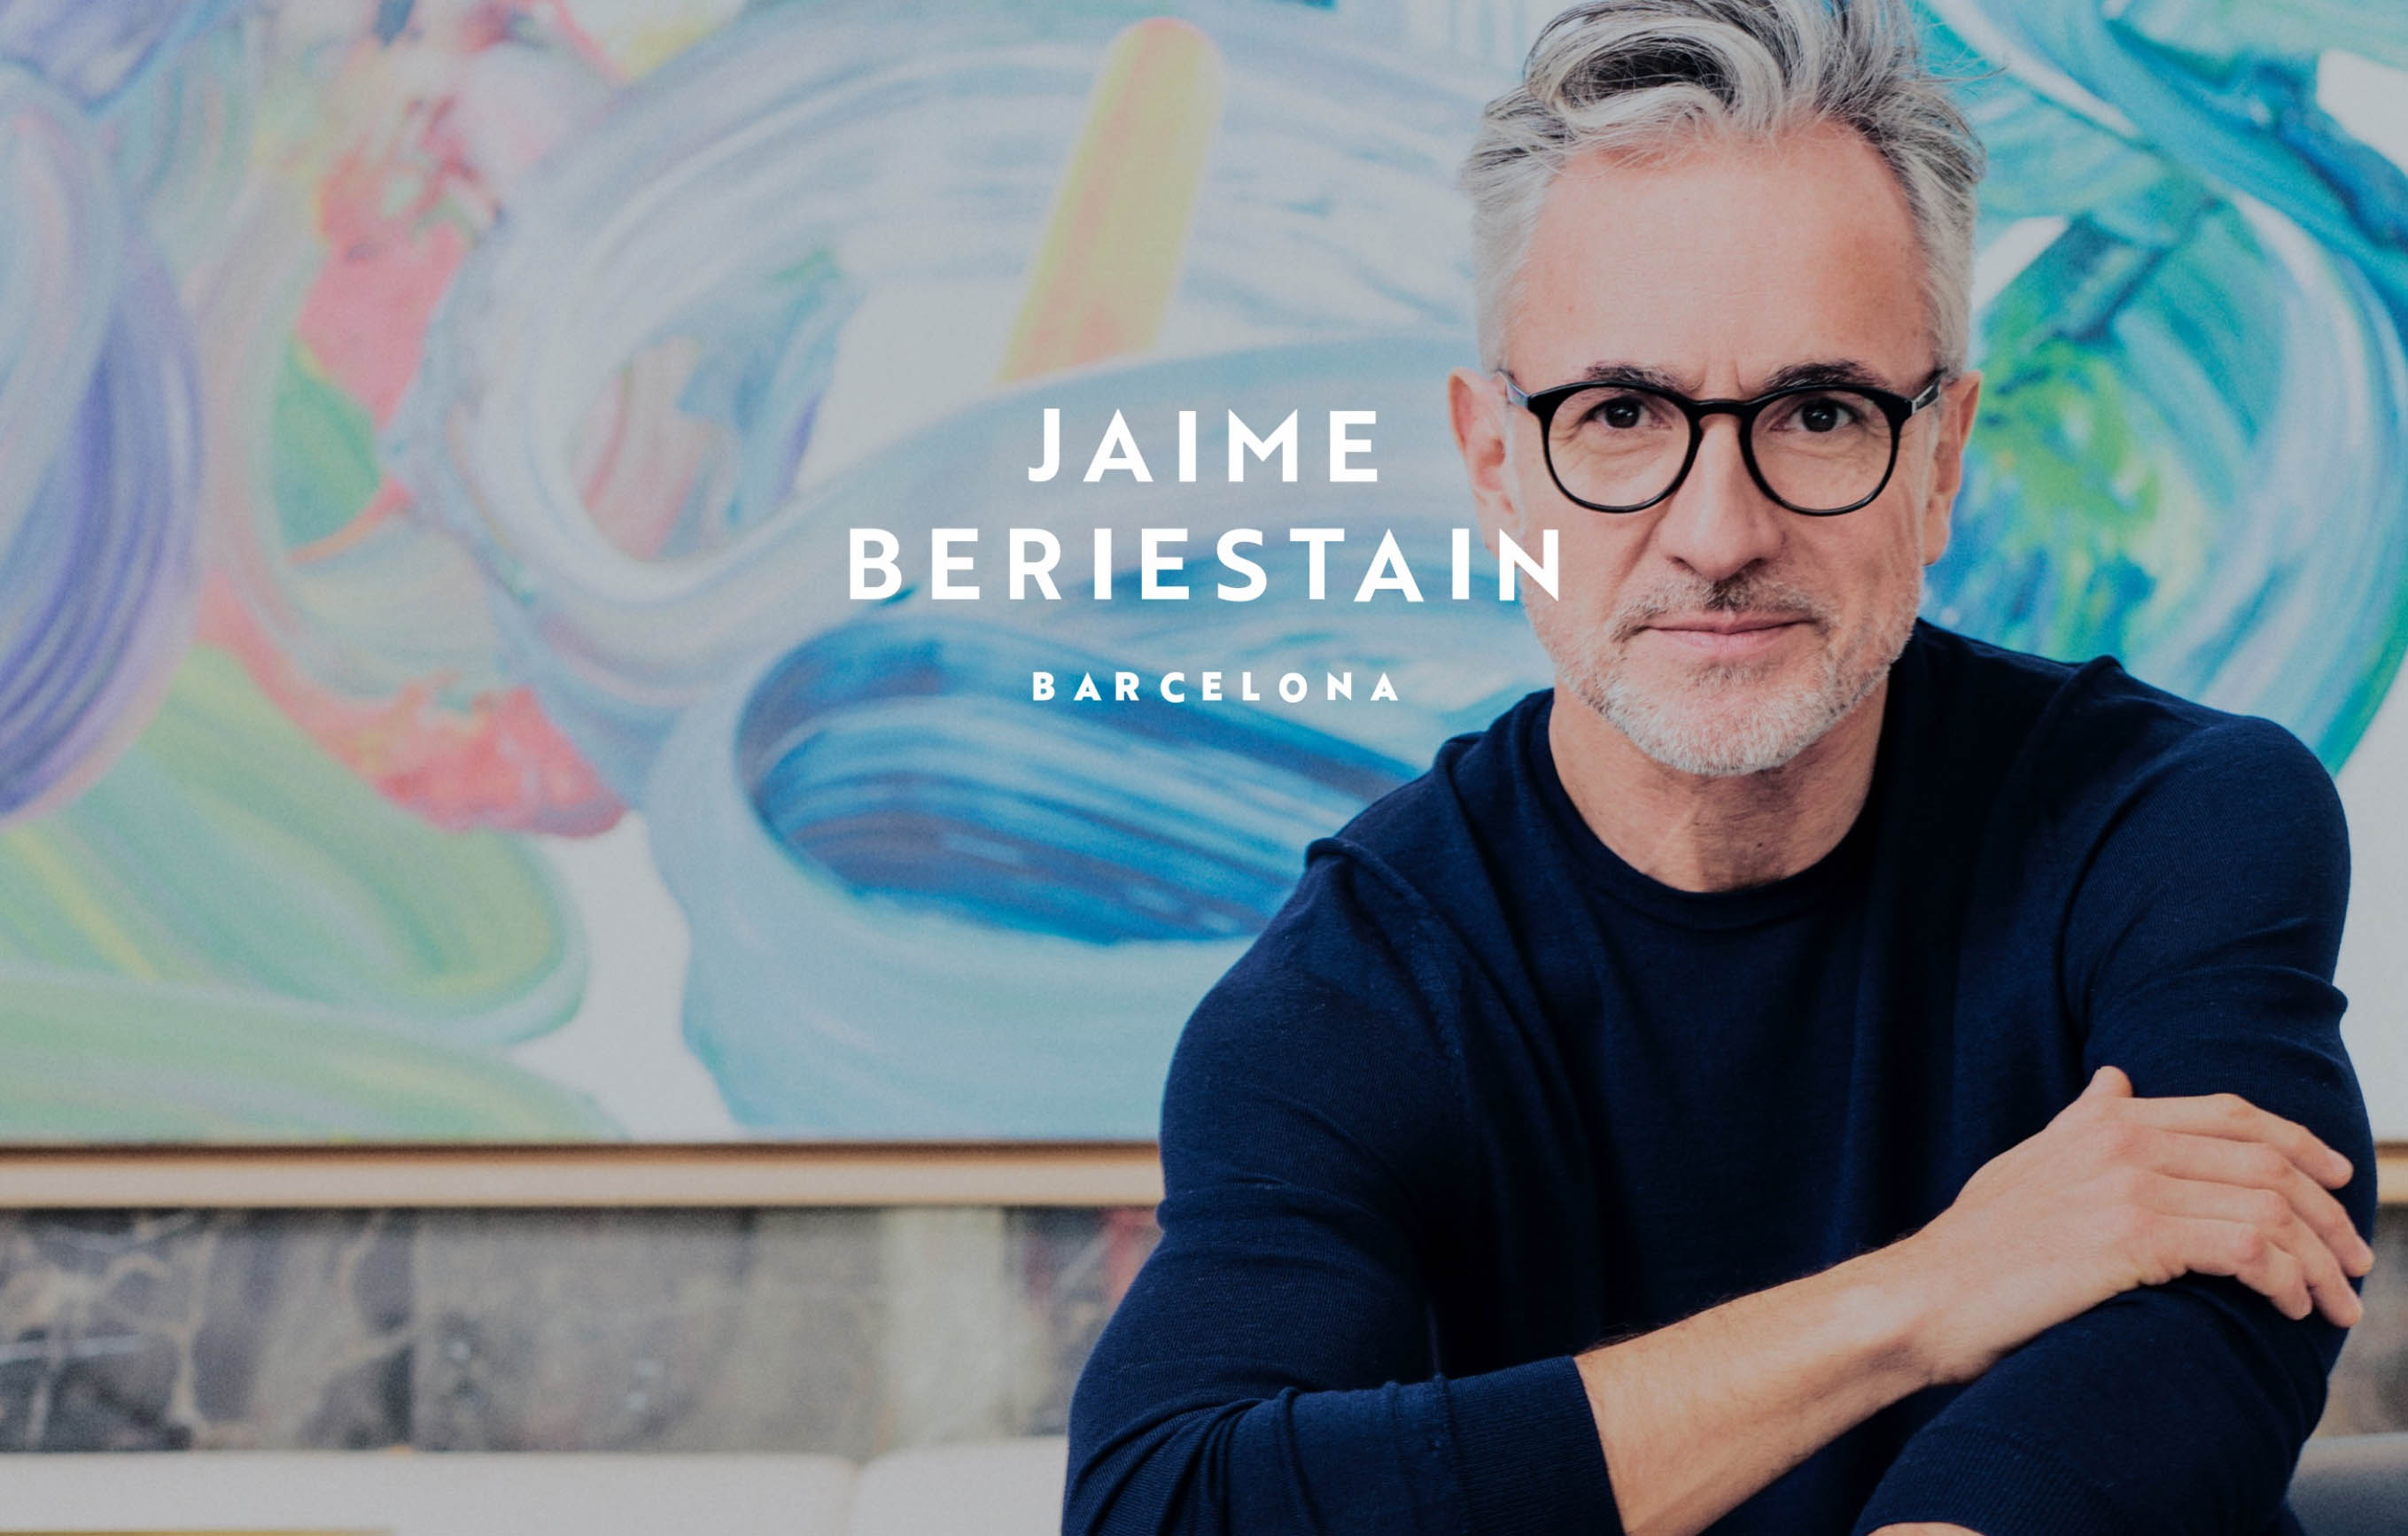 Jaime Beriestain is a famous Chilean interior designer who has not stopped growing since he arrived in Barcelona: he has created his own studio, a showroom next to Gaudí's La Pedrera and two successful ventures: the Concept Store and the Café.
